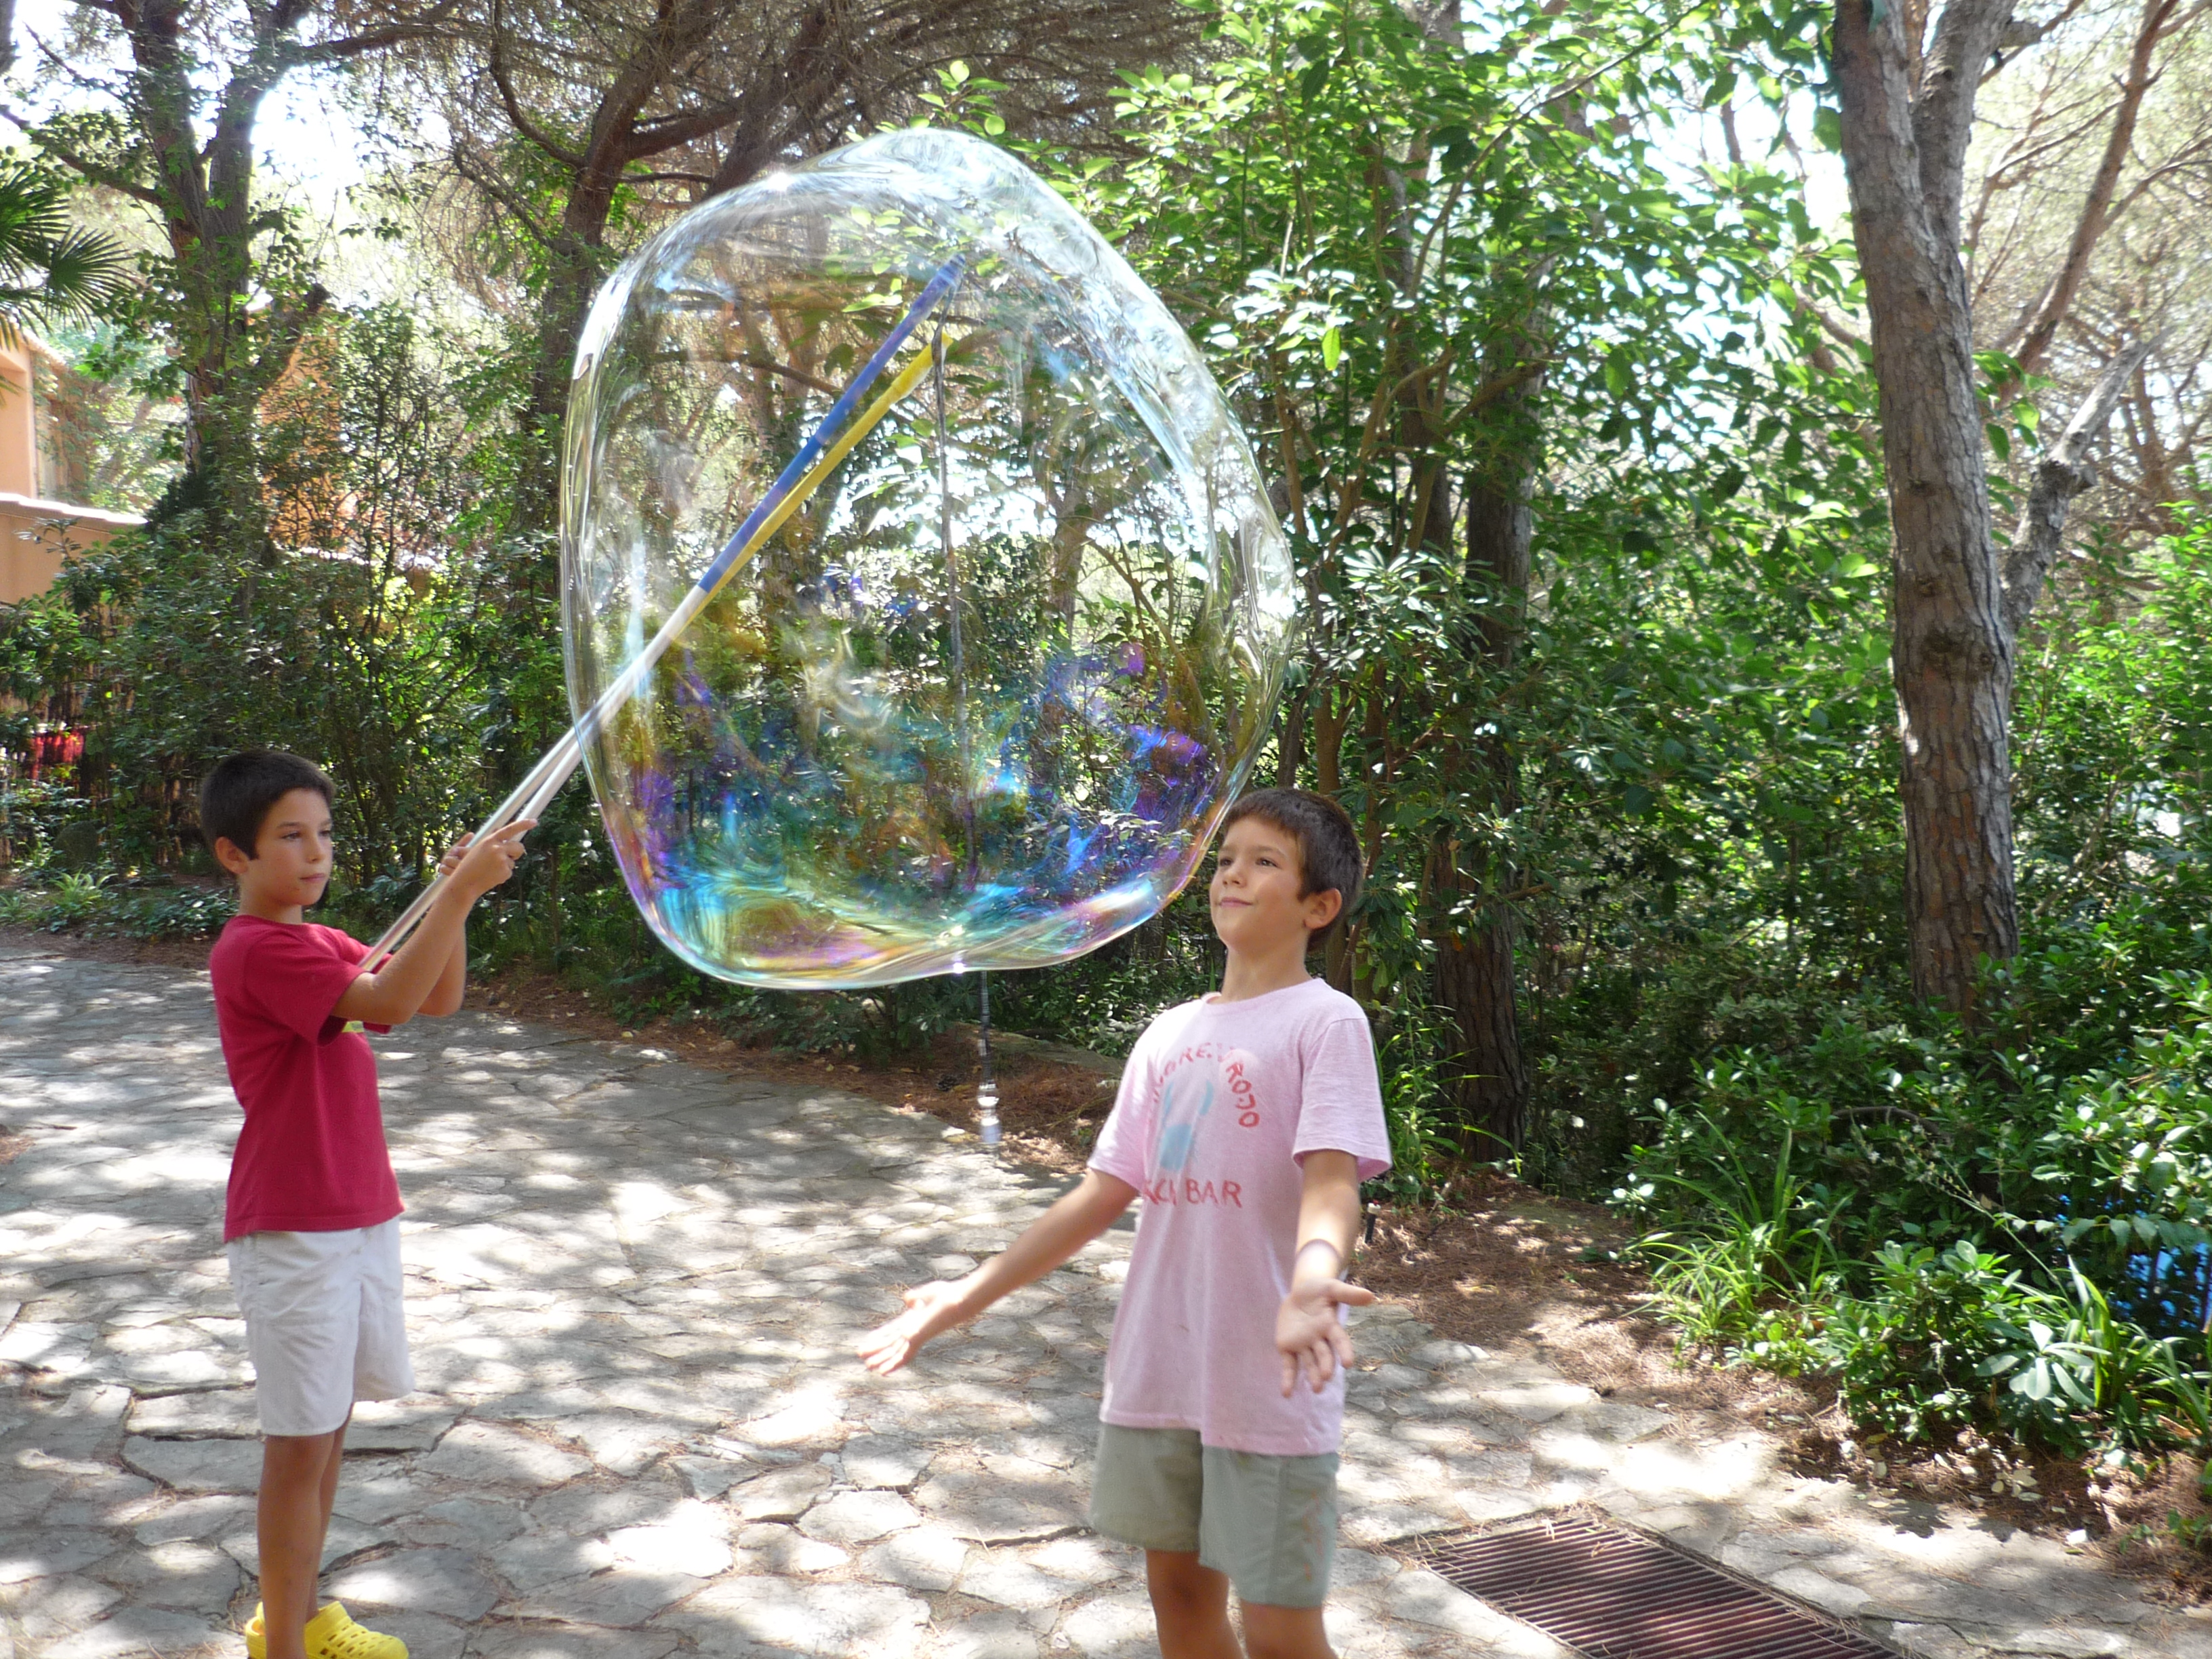 My children blowing giant soap bubbles during summer